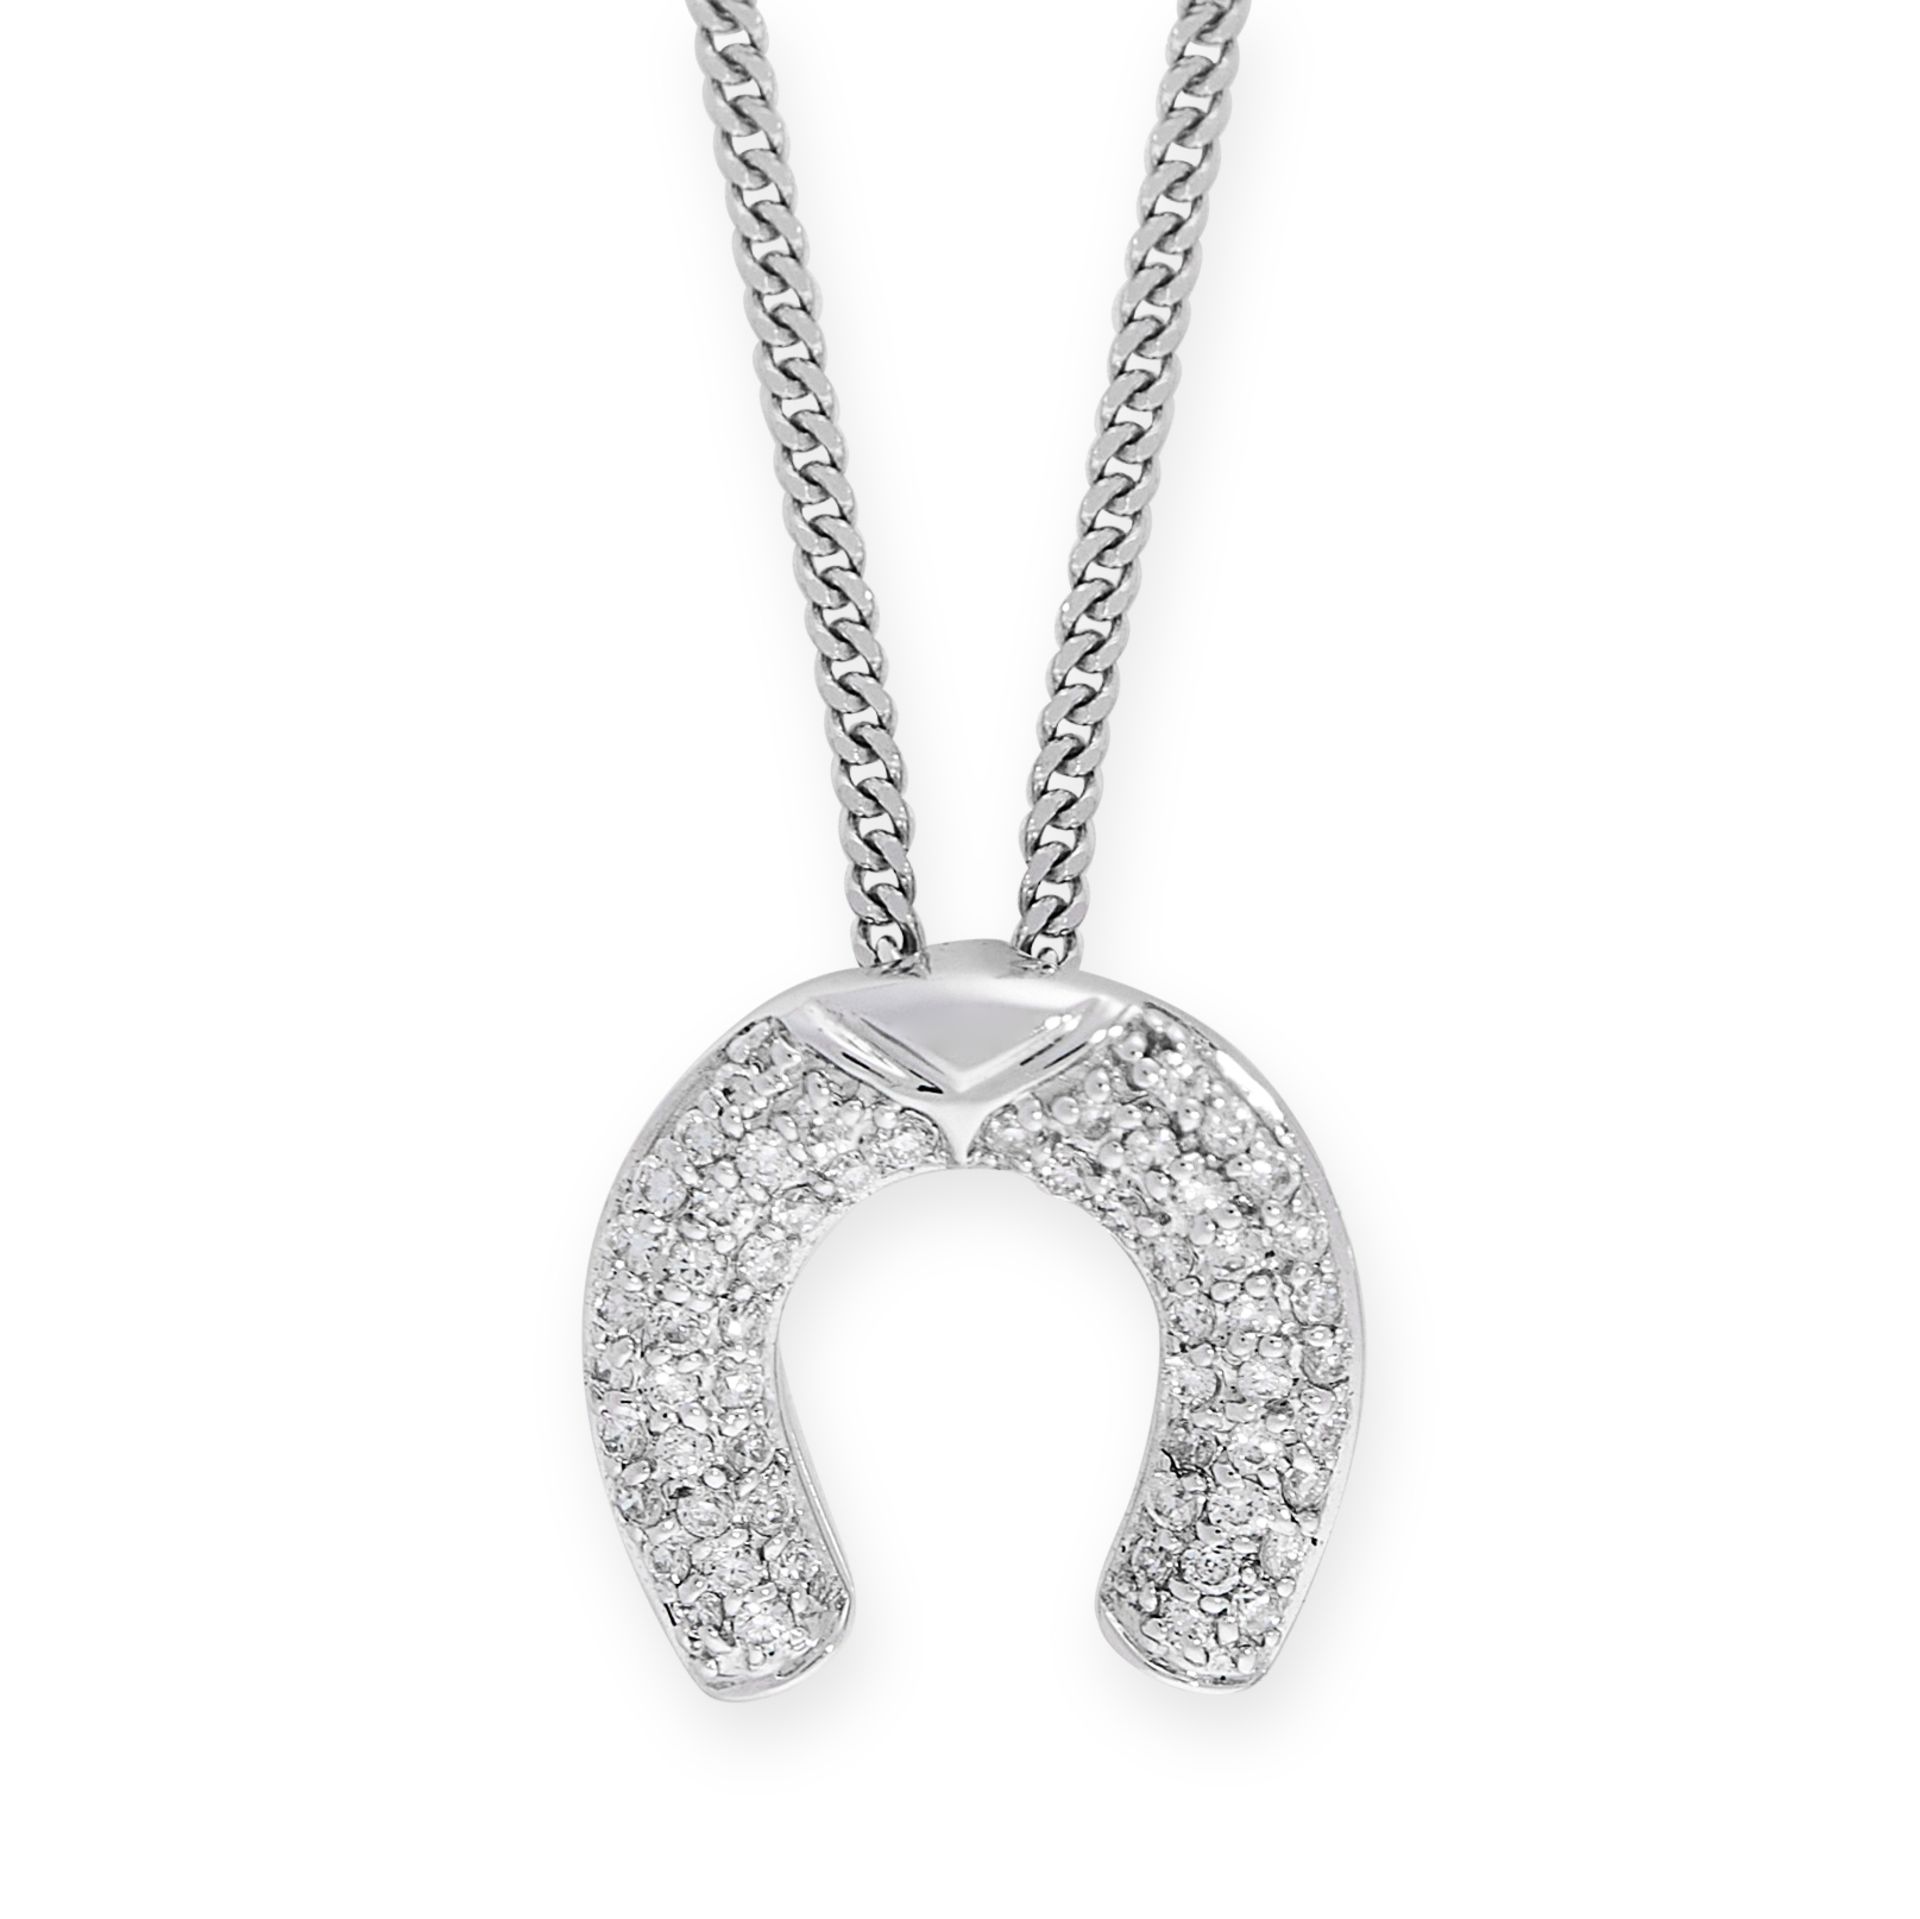 A DIAMOND PENDANT AND CHAIN in 18ct white gold, designed as a horseshoe, pave set with round cut